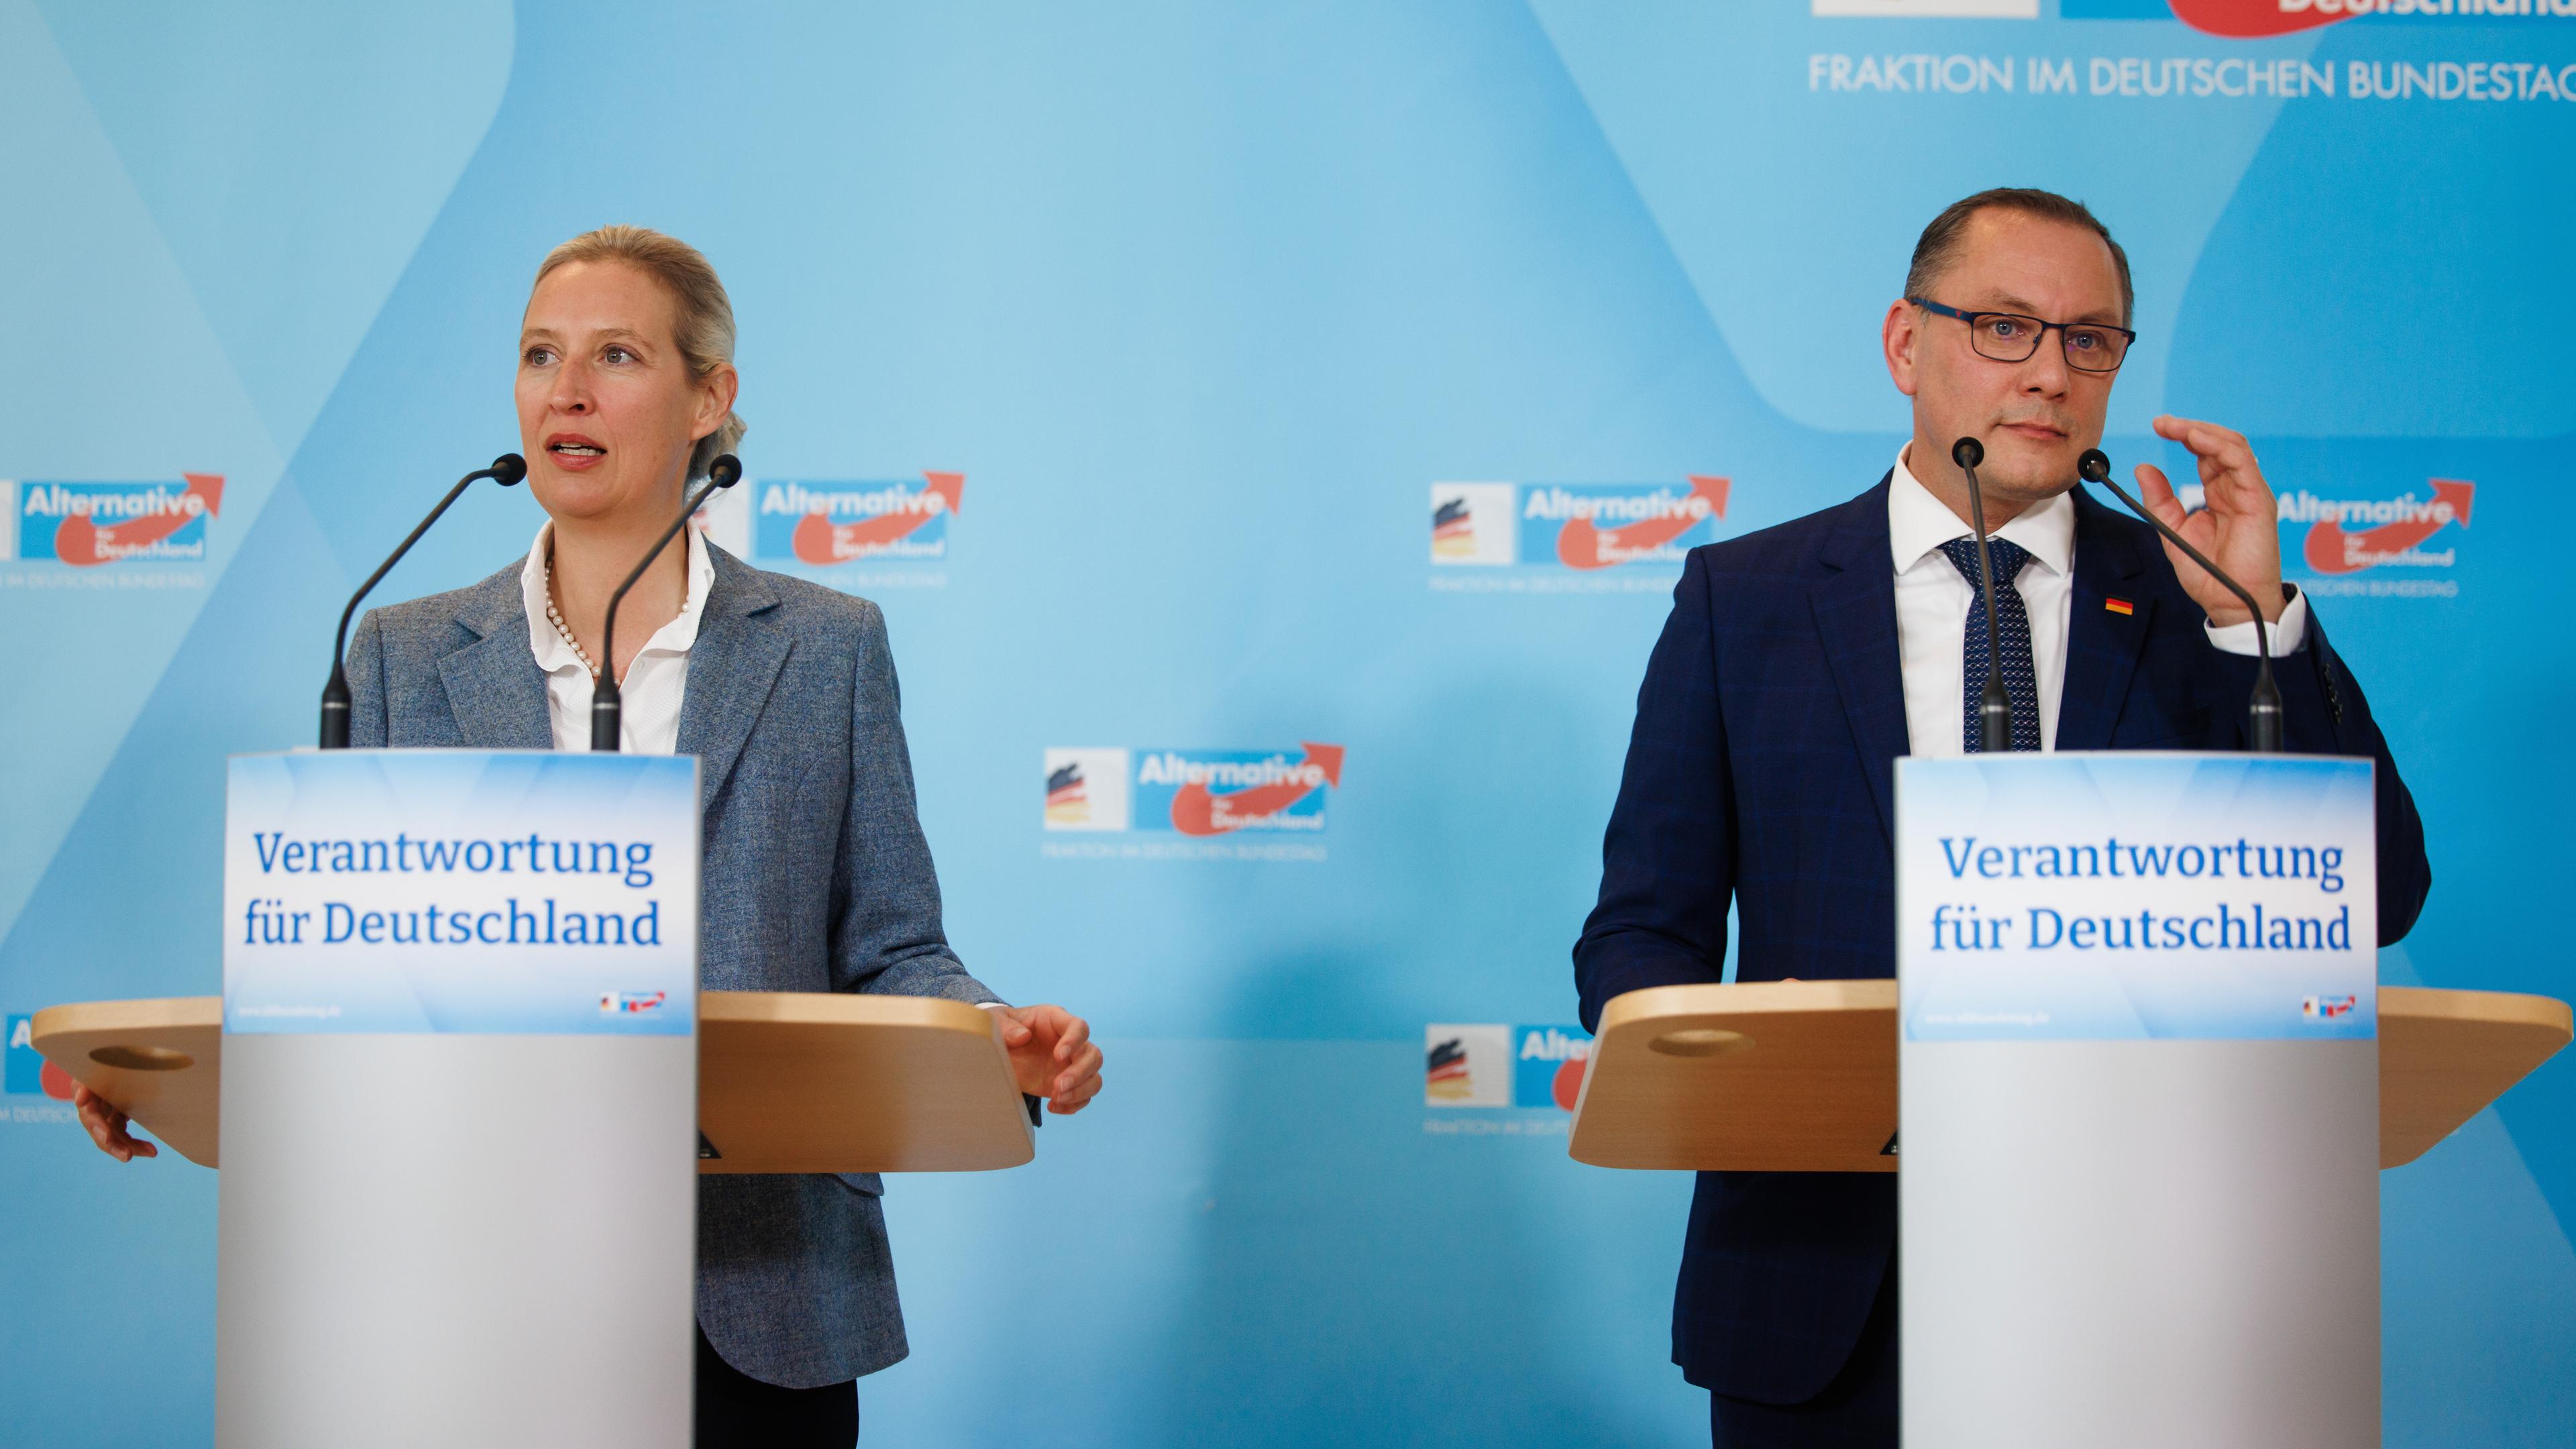 Alternative for Germany (AfD) press statement prior to faction meeting